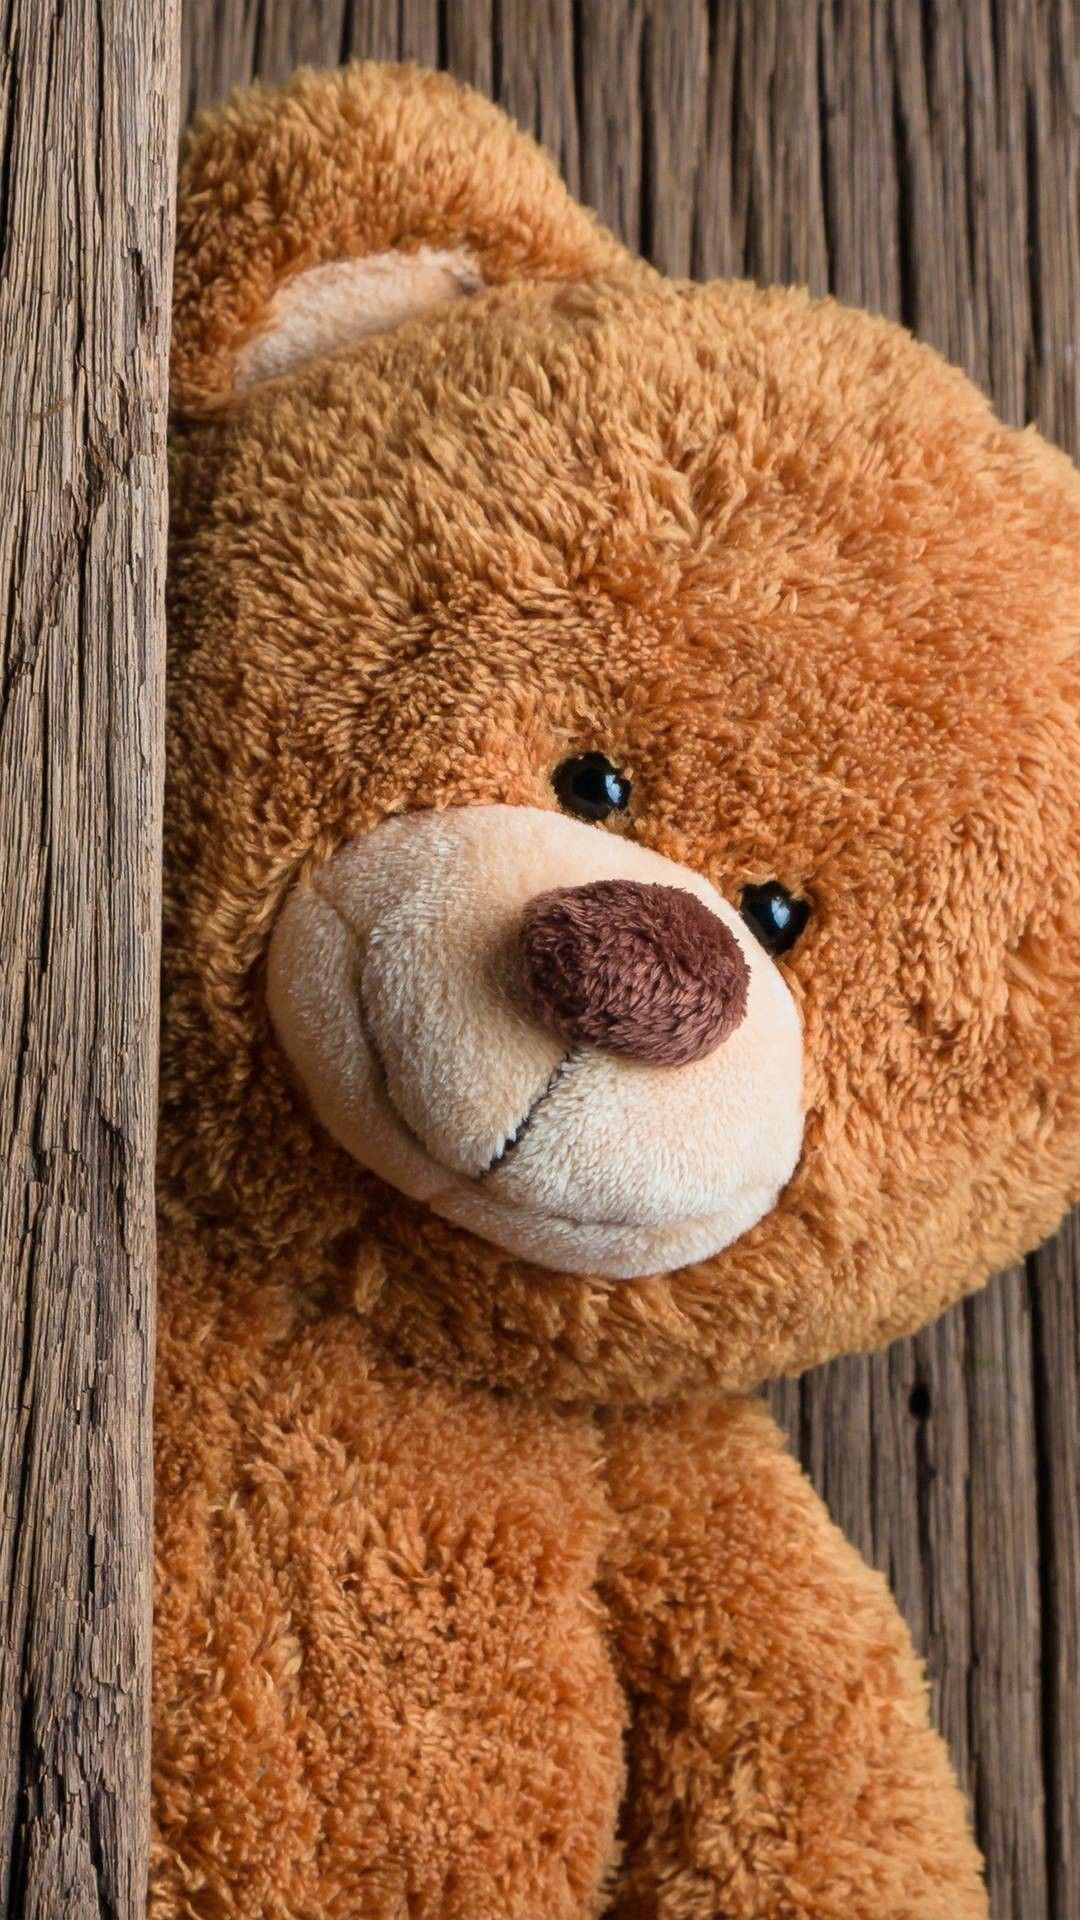 Detail Images Of Teddy Bear Nomer 27